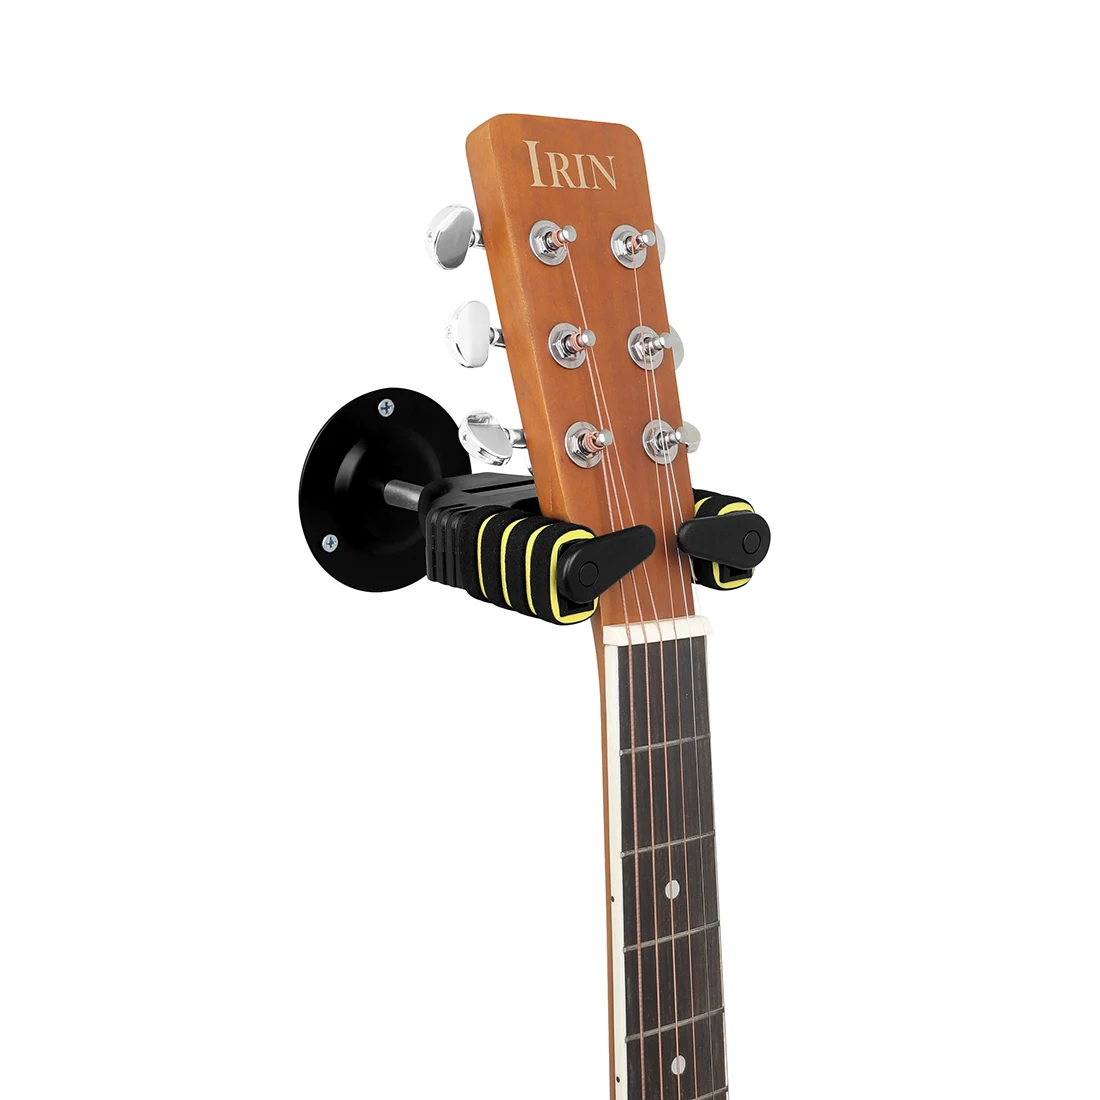 Guitar Stand Wall Mount Round Base Gravity Self-Locking Wall Stand Bracket Guitar Violin Bass Ukulele Guitar Parts Accessories portable guitar ukulele violin holder stand foldable collapsible vertical guitar display stand rack musical instrument parts